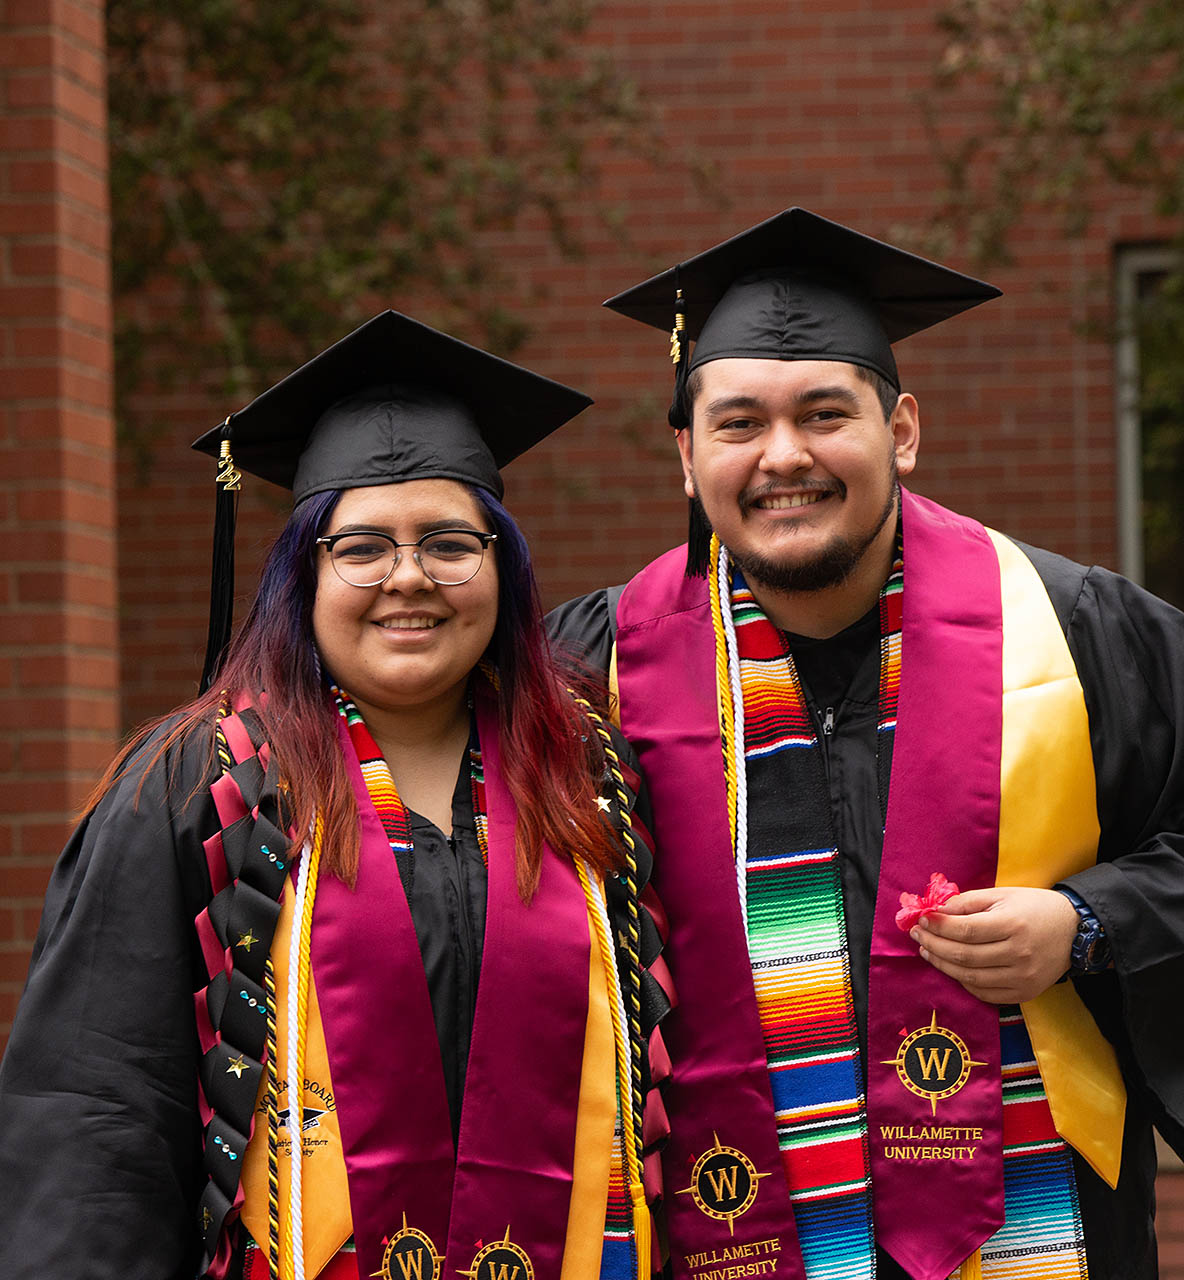 Two Willamette University students at Commencement.